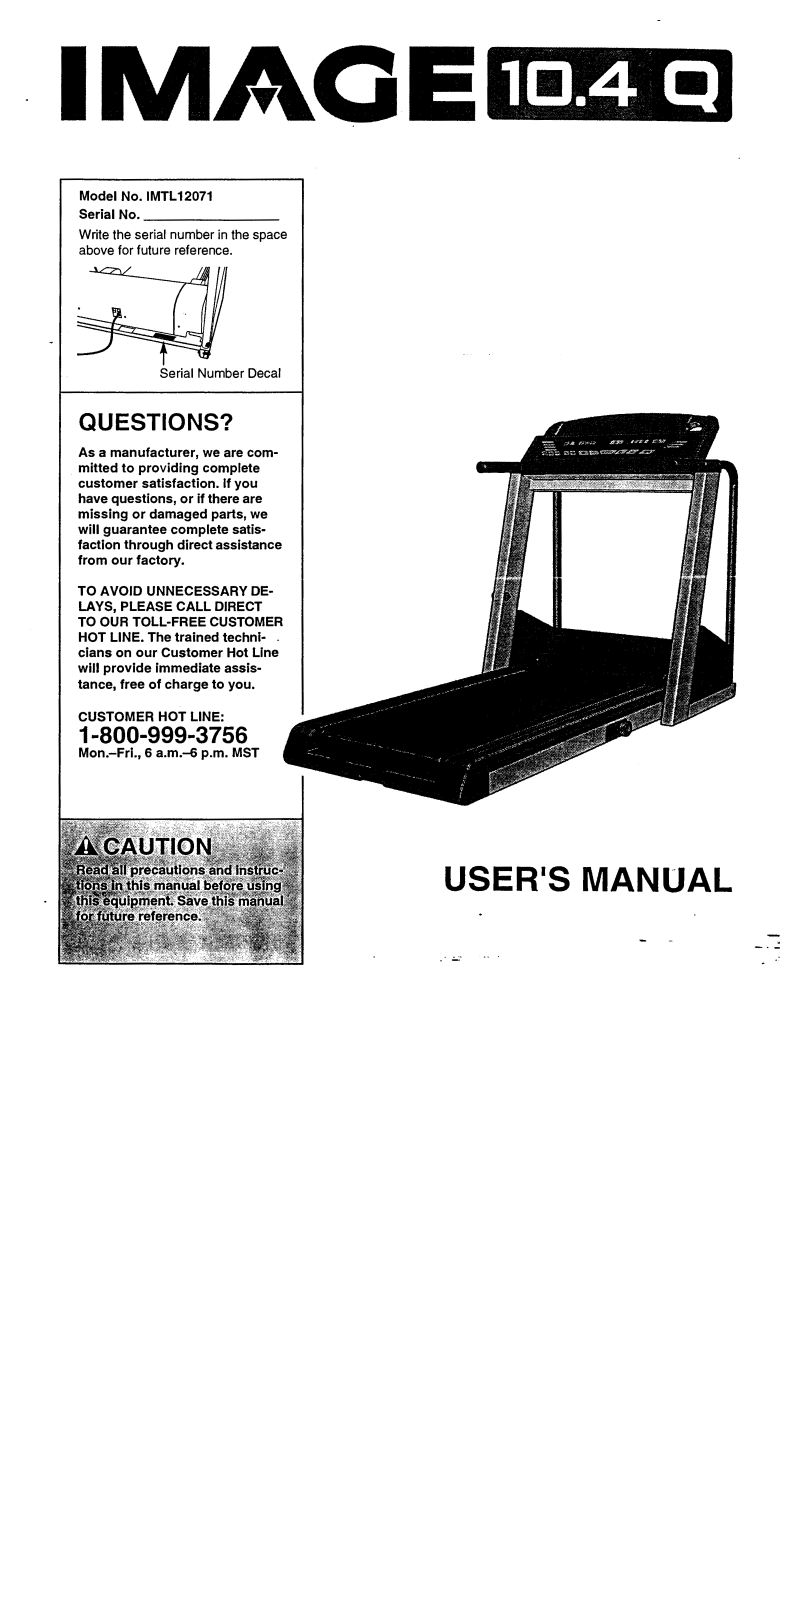 Image IMTL12071 Owner's Manual